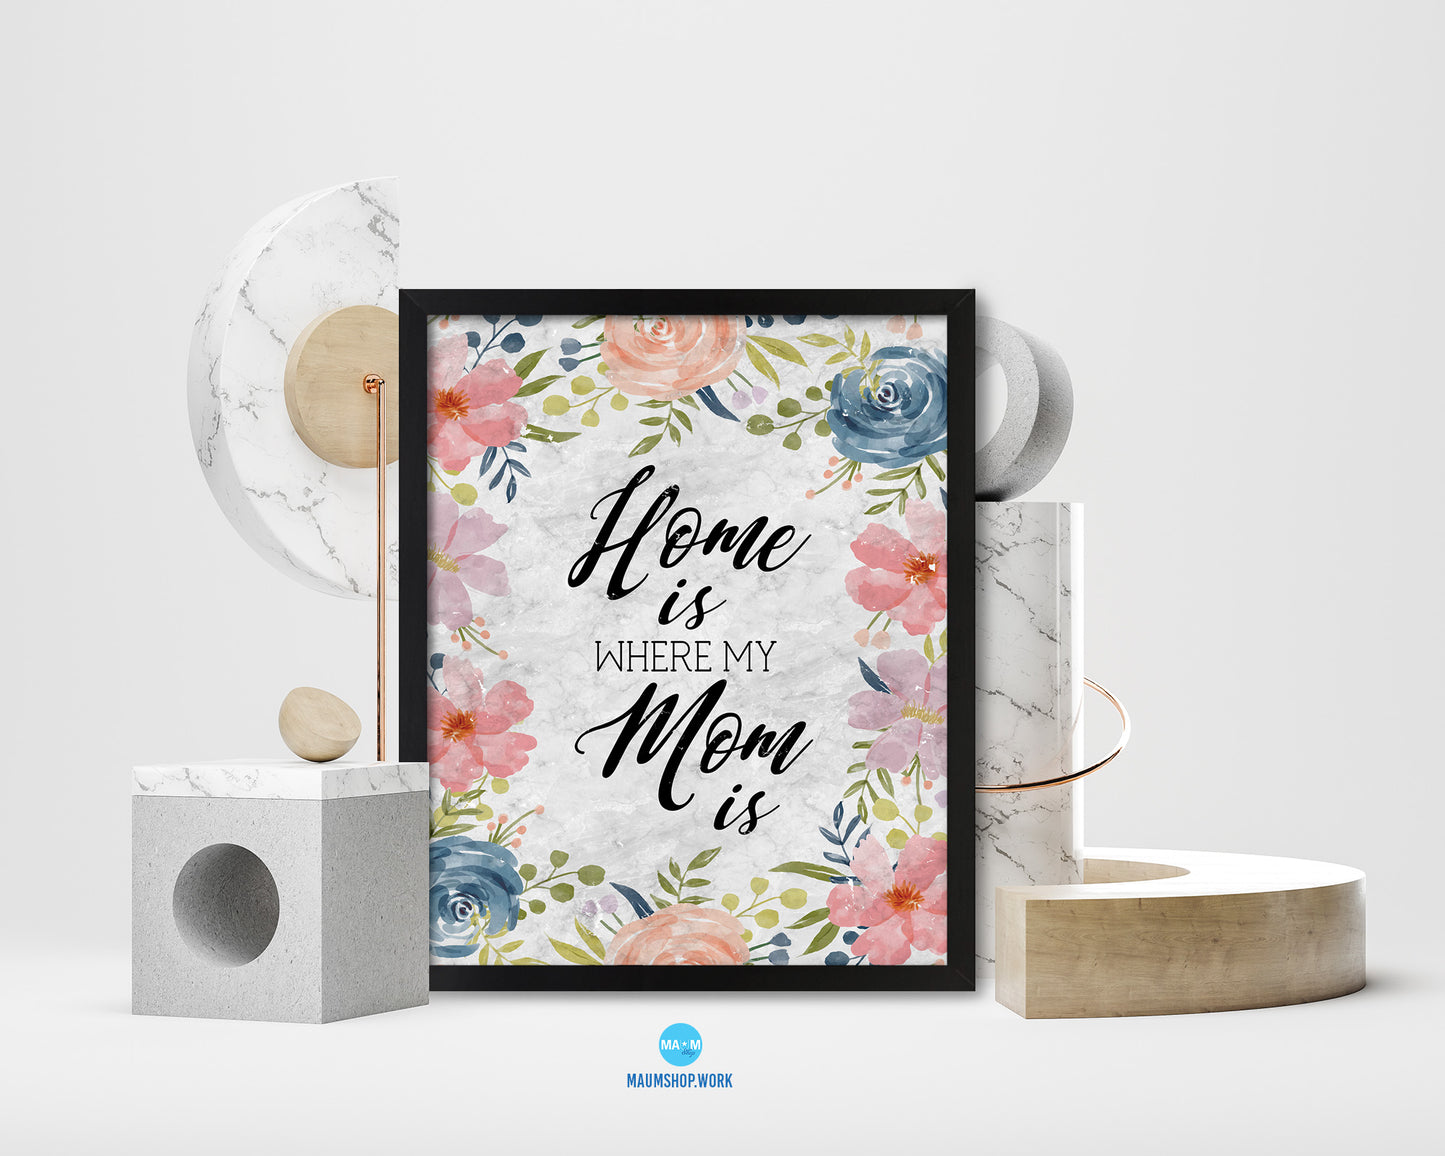 Home is where my mom is Quote Framed Print Wall Art Decor Gifts